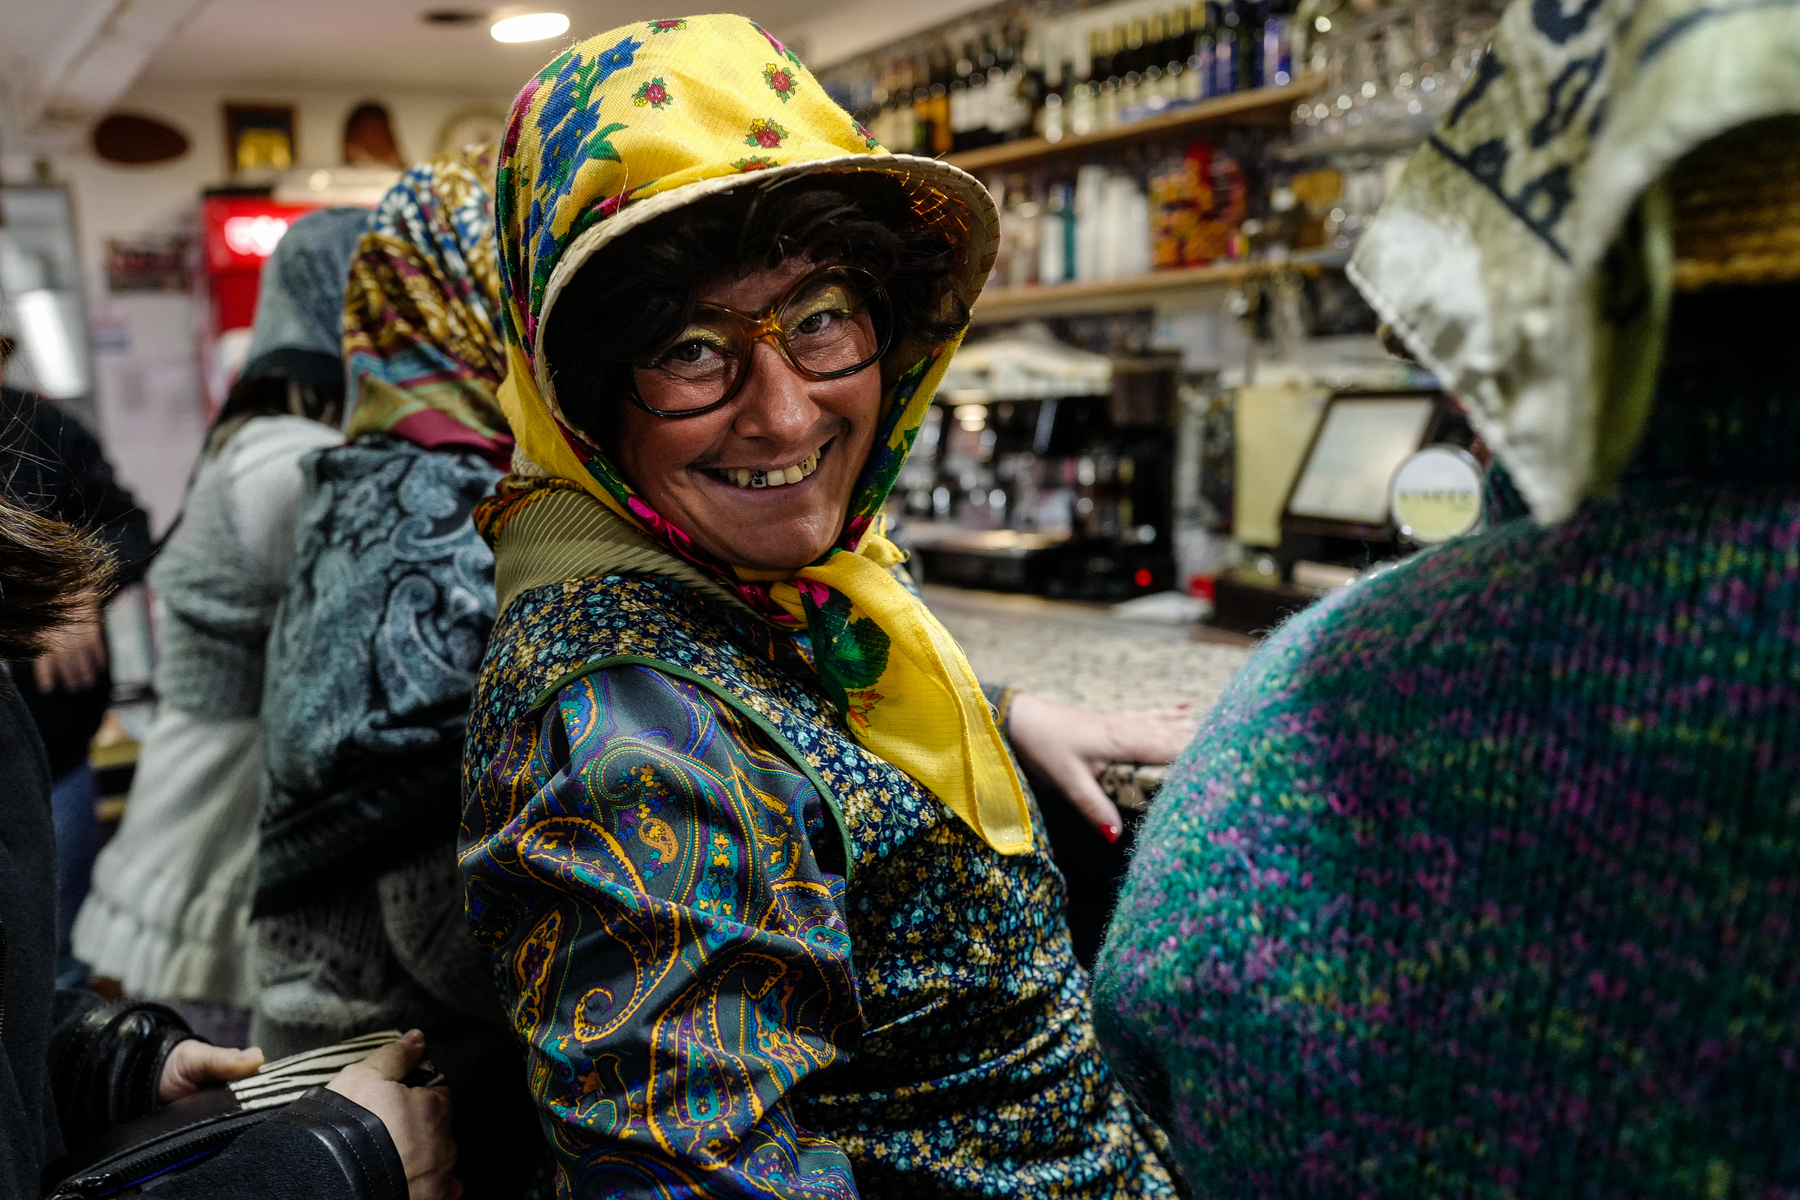 A smiling person wearing glasses, a patterned headscarf, and a colorful jacket inside a bar or café. Other patrons are in the background.